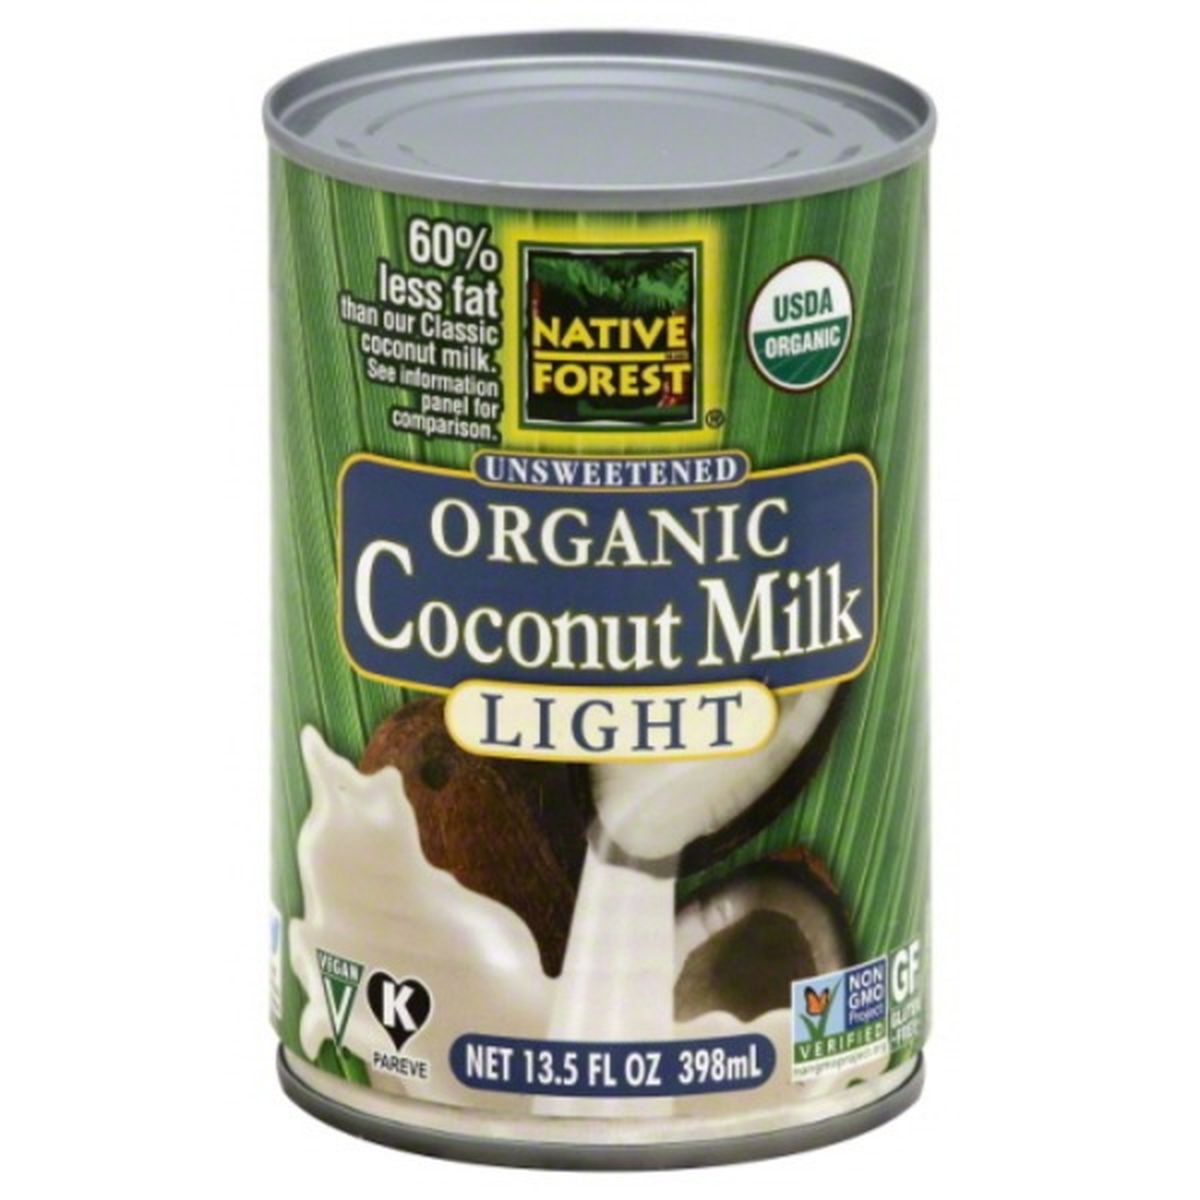 Calories in Native Forest Coconut Milk, Organic, Light, Unsweetened